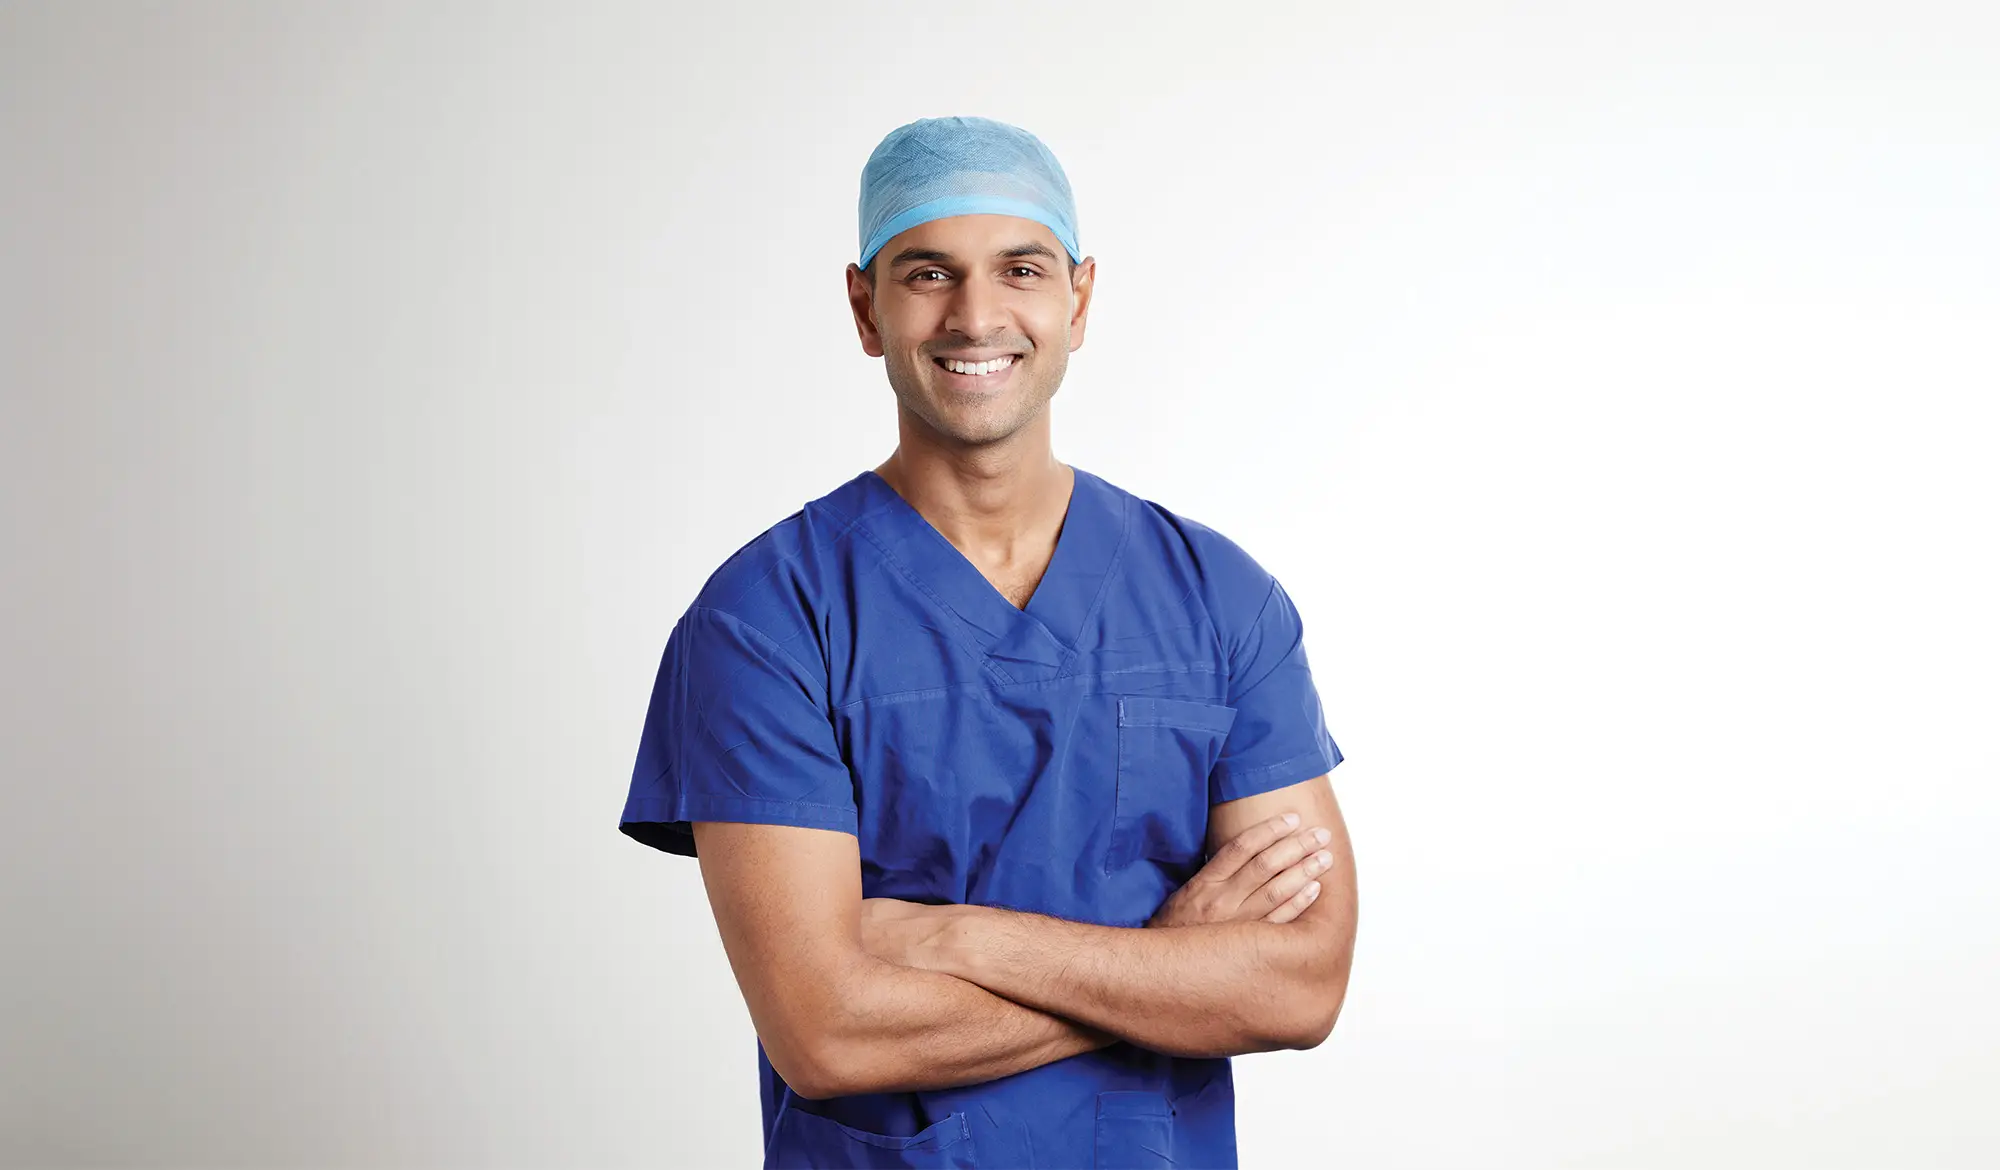 Dr Nikhil Vasan wearing medical scrubs. He stands in a confident posture and smiles at the viewer.